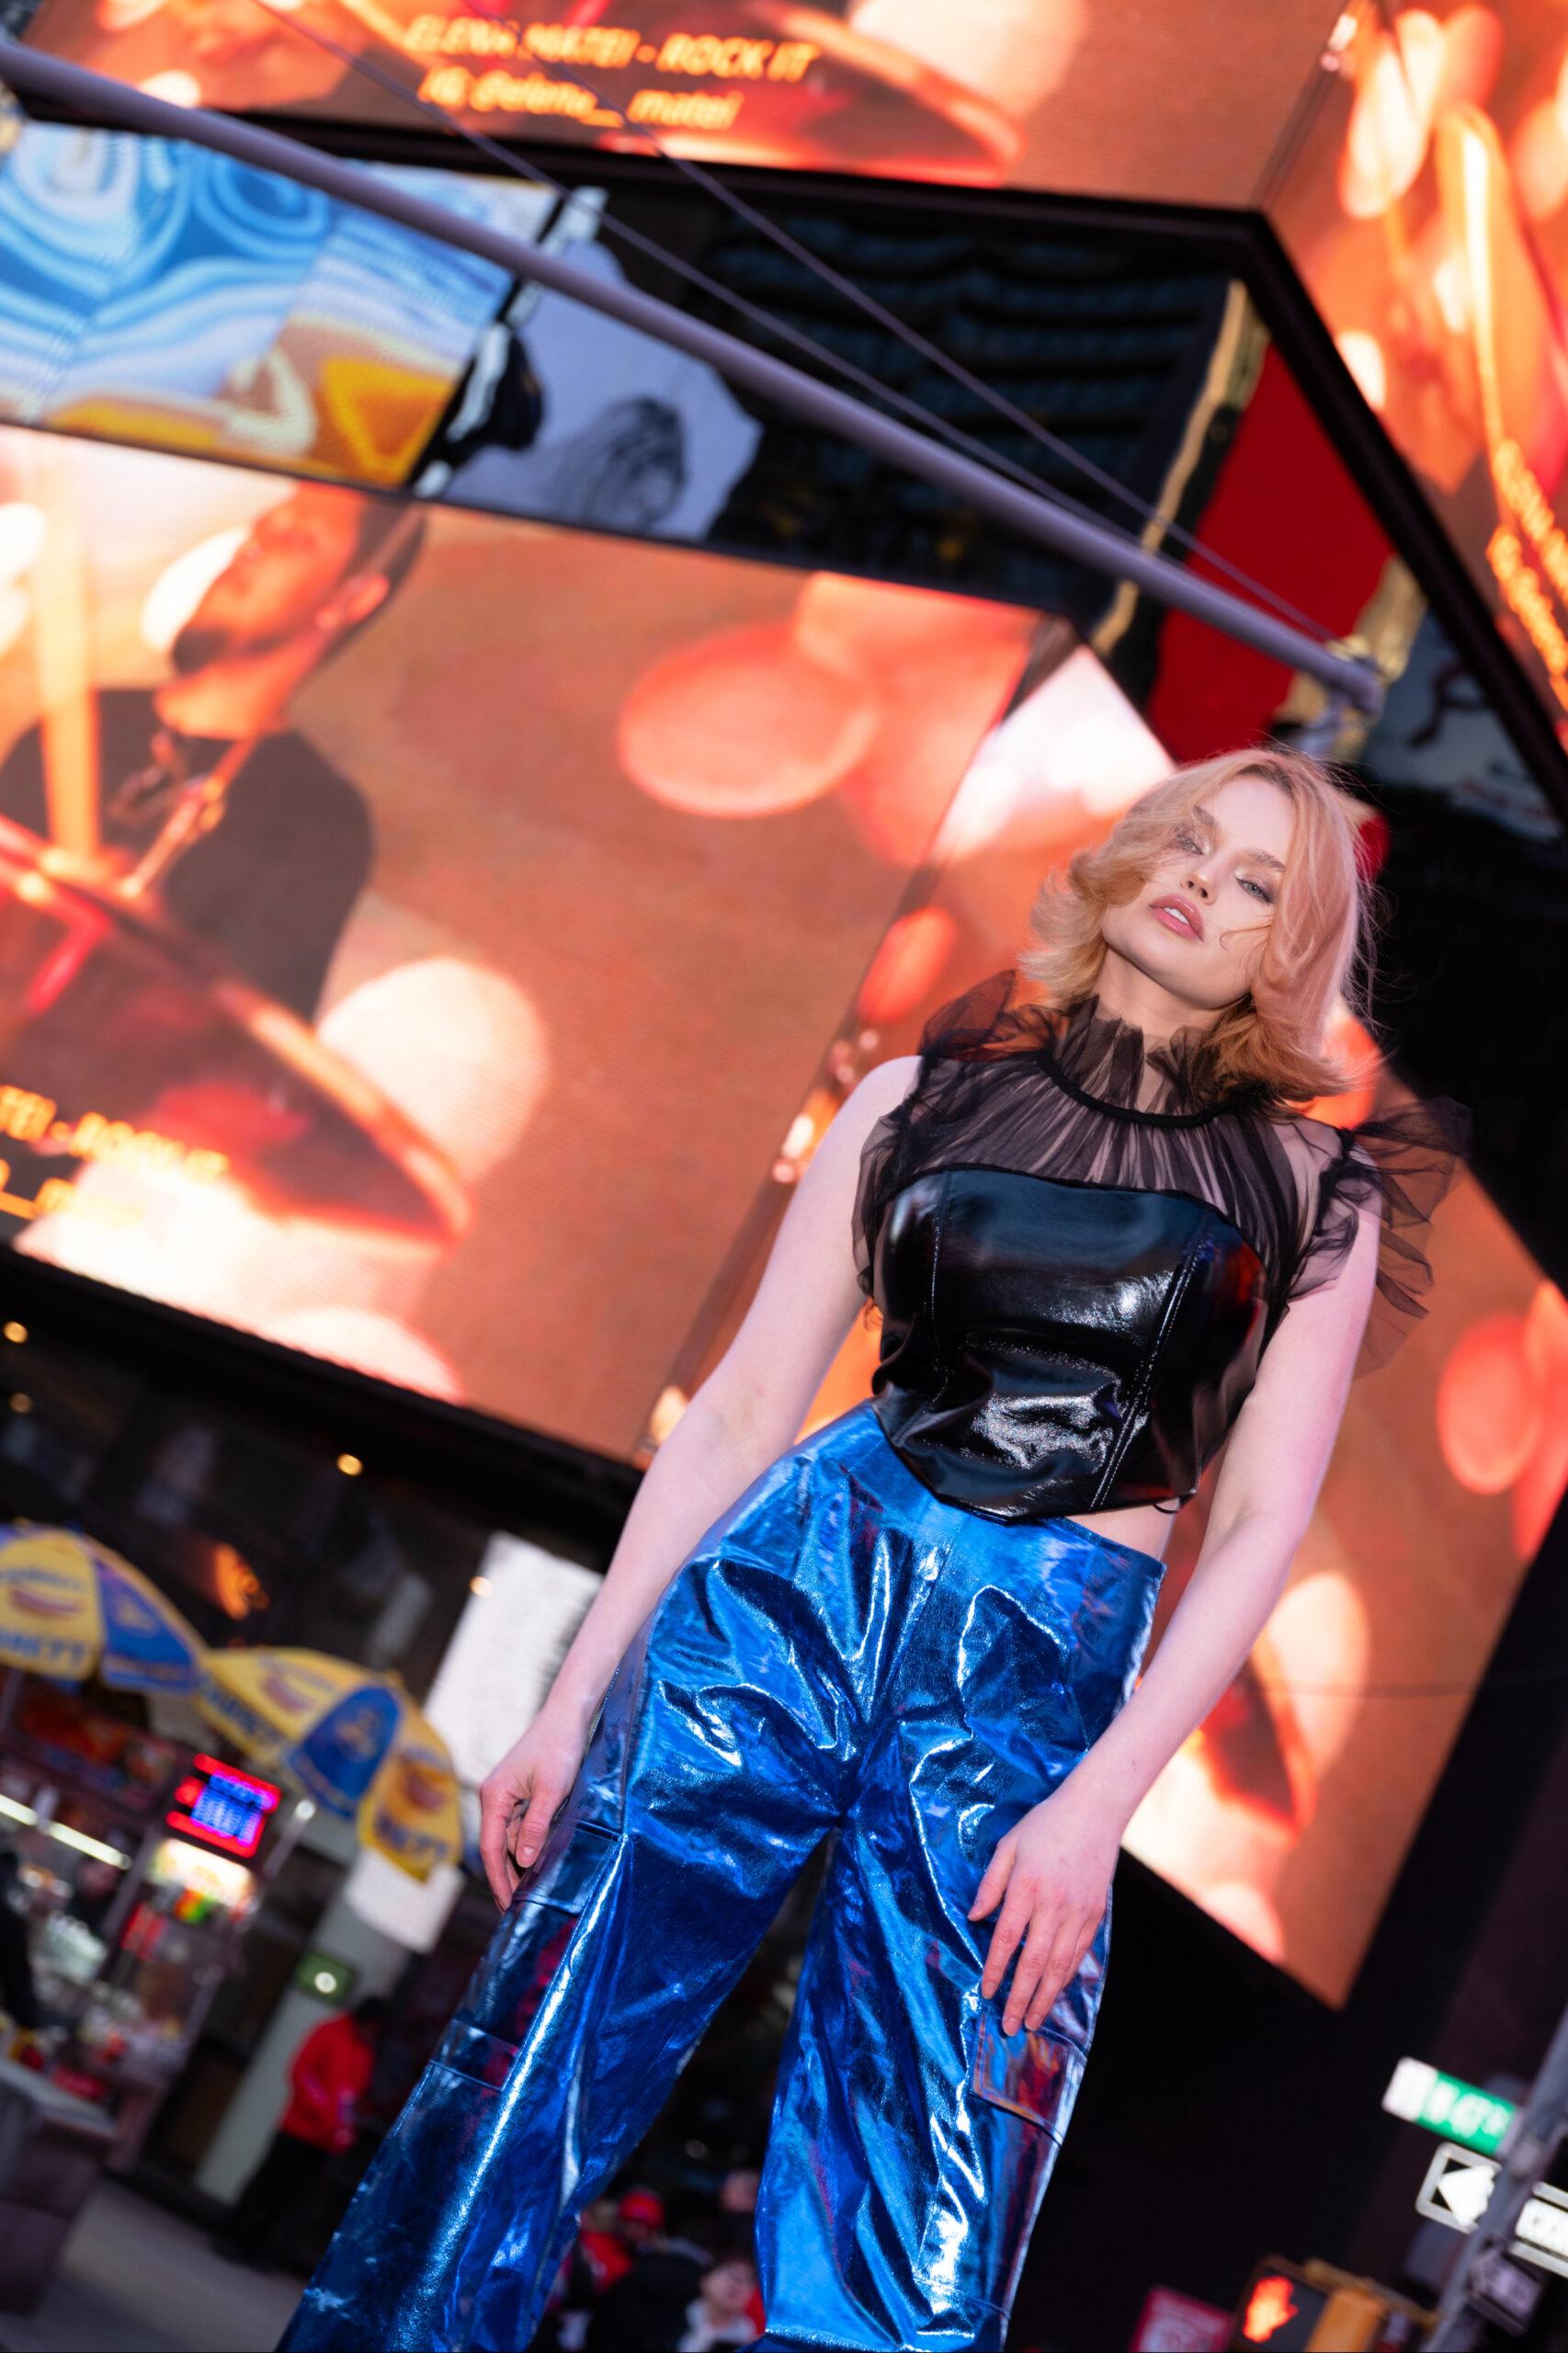 International star Elena Matei takes over New York's Times Square for the launch of 'Rock It'. [PHOTOS]